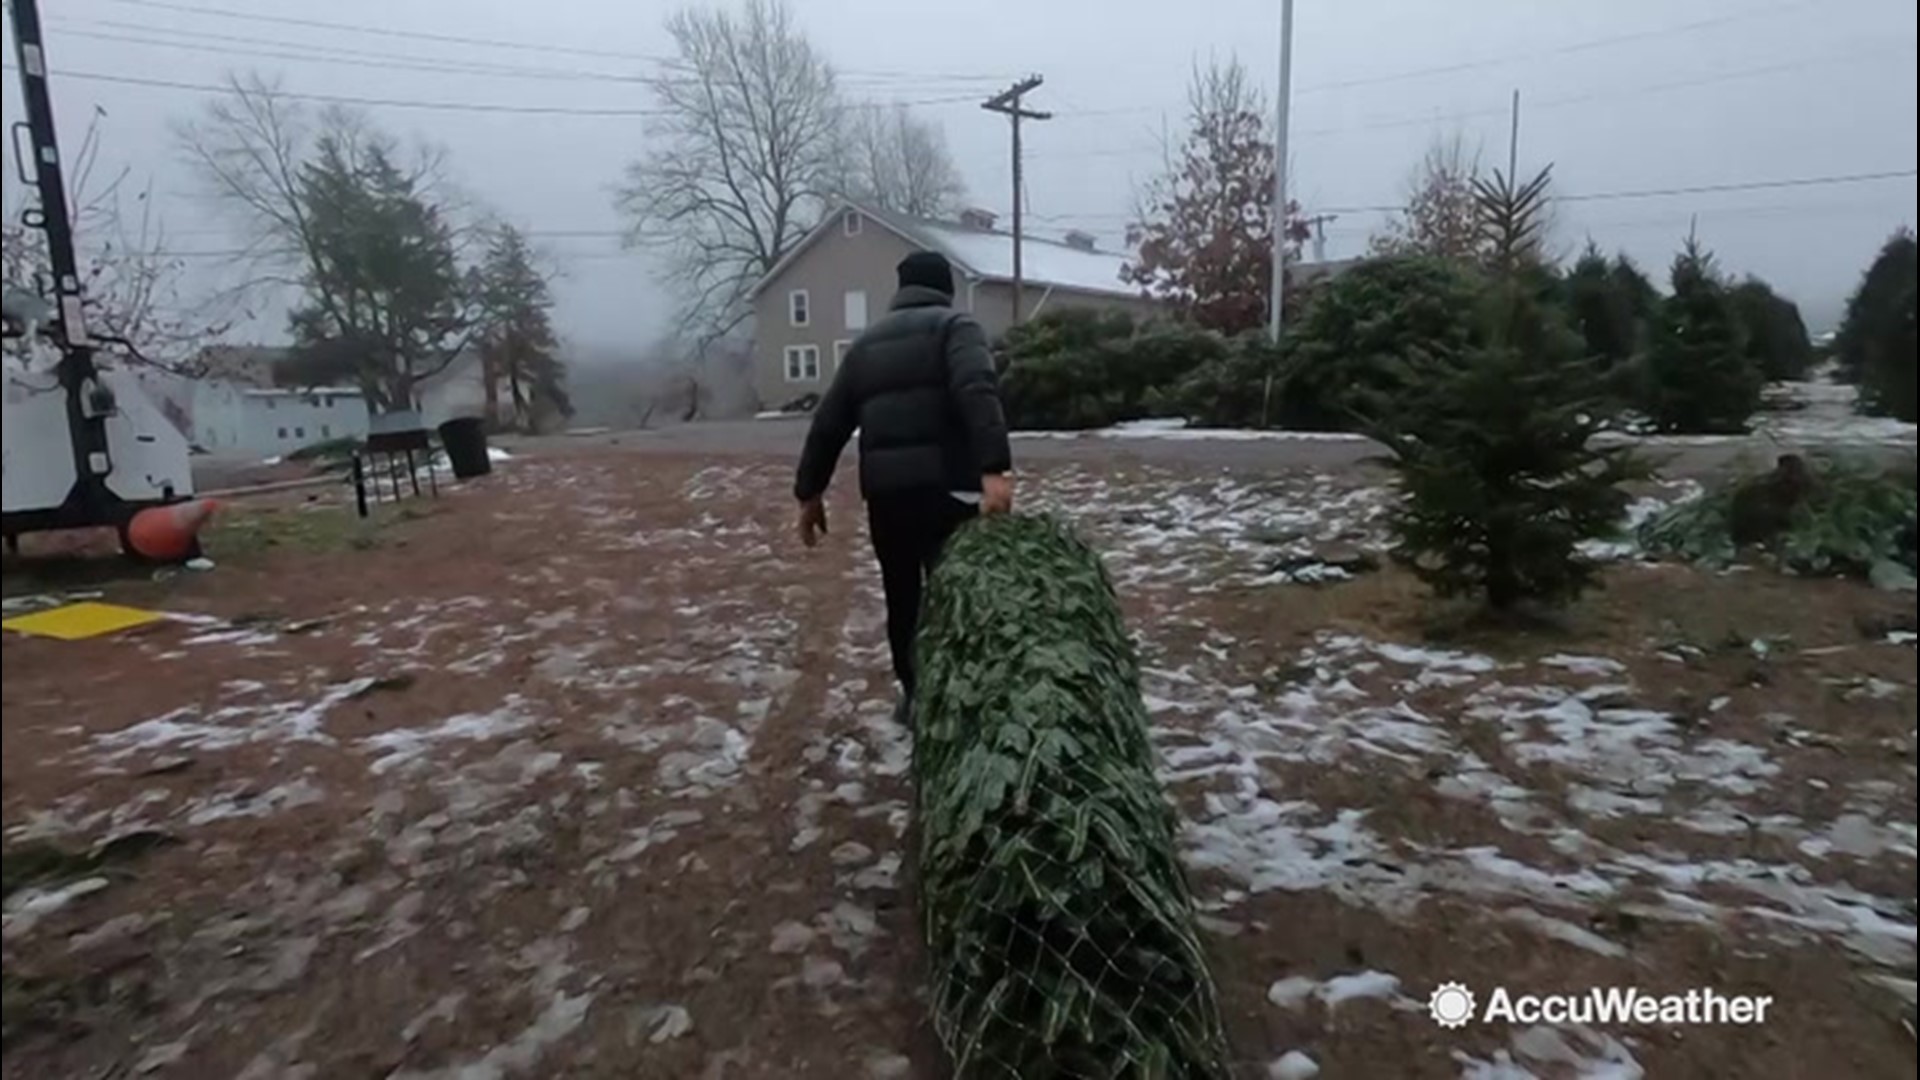 Accuweather's Dexter Henry visited a tree farm for some tips on cutting and transporting Christmas trees home safely in various weather conditions.